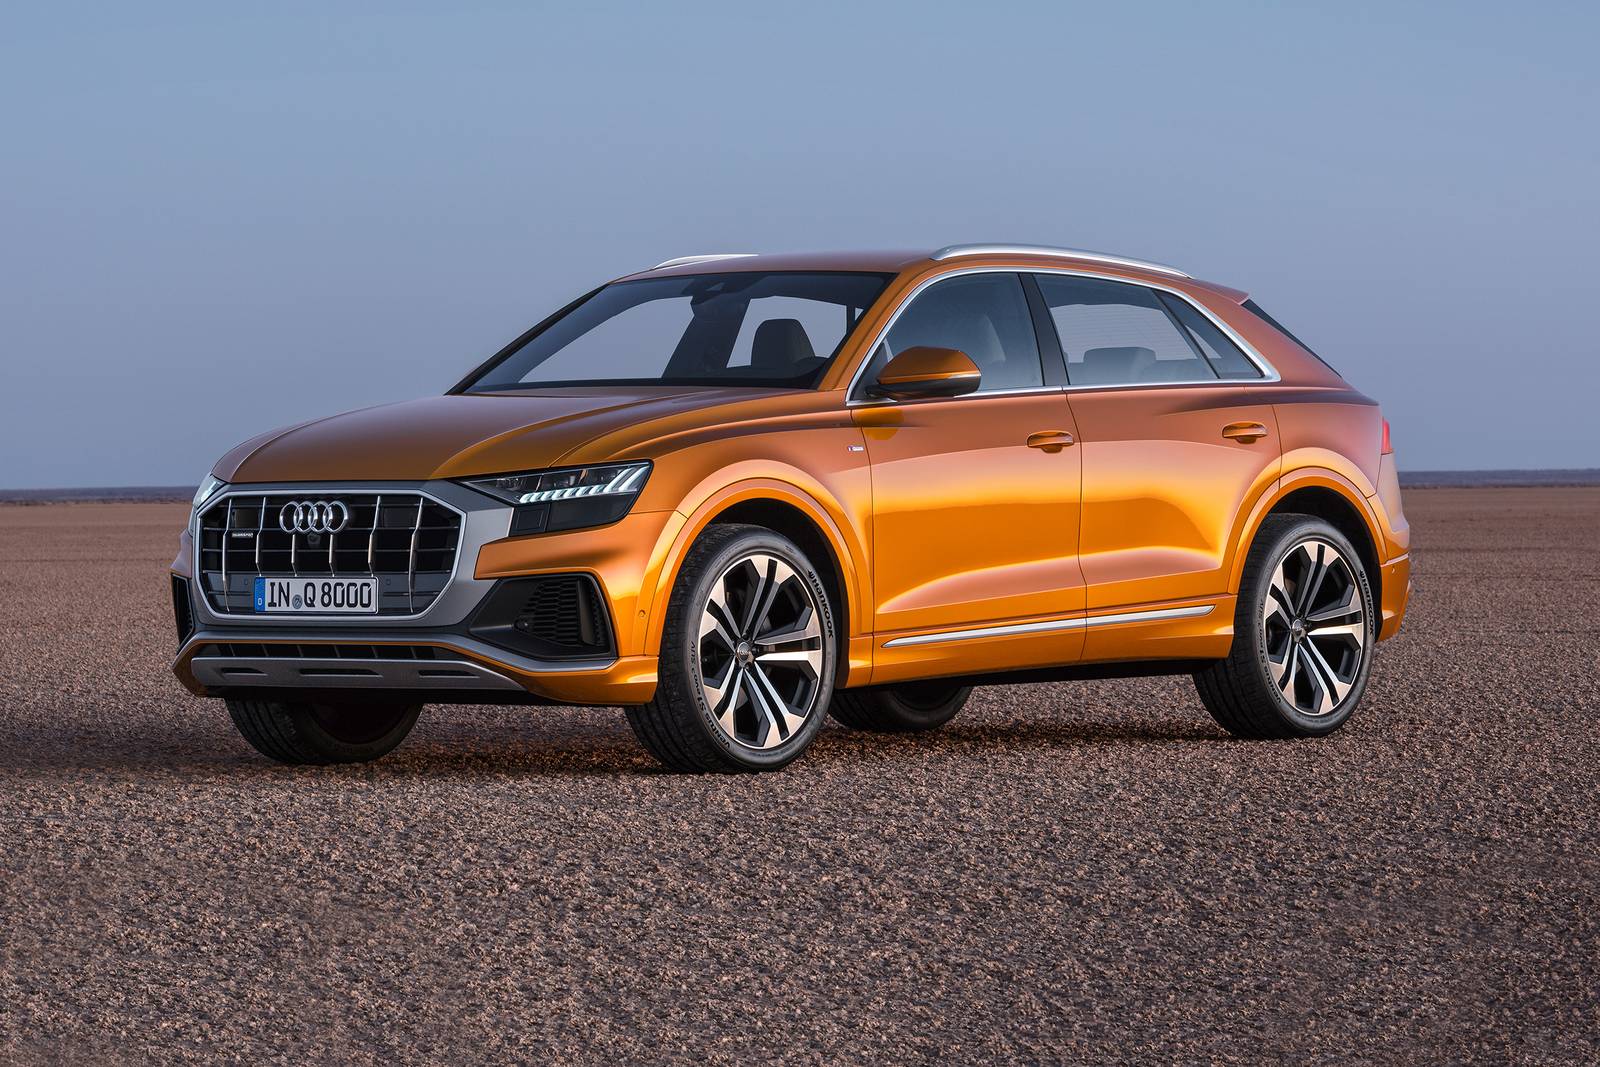 2019 Audi Q7 SUV: Latest Prices, Reviews, Specs, Photos and Incentives